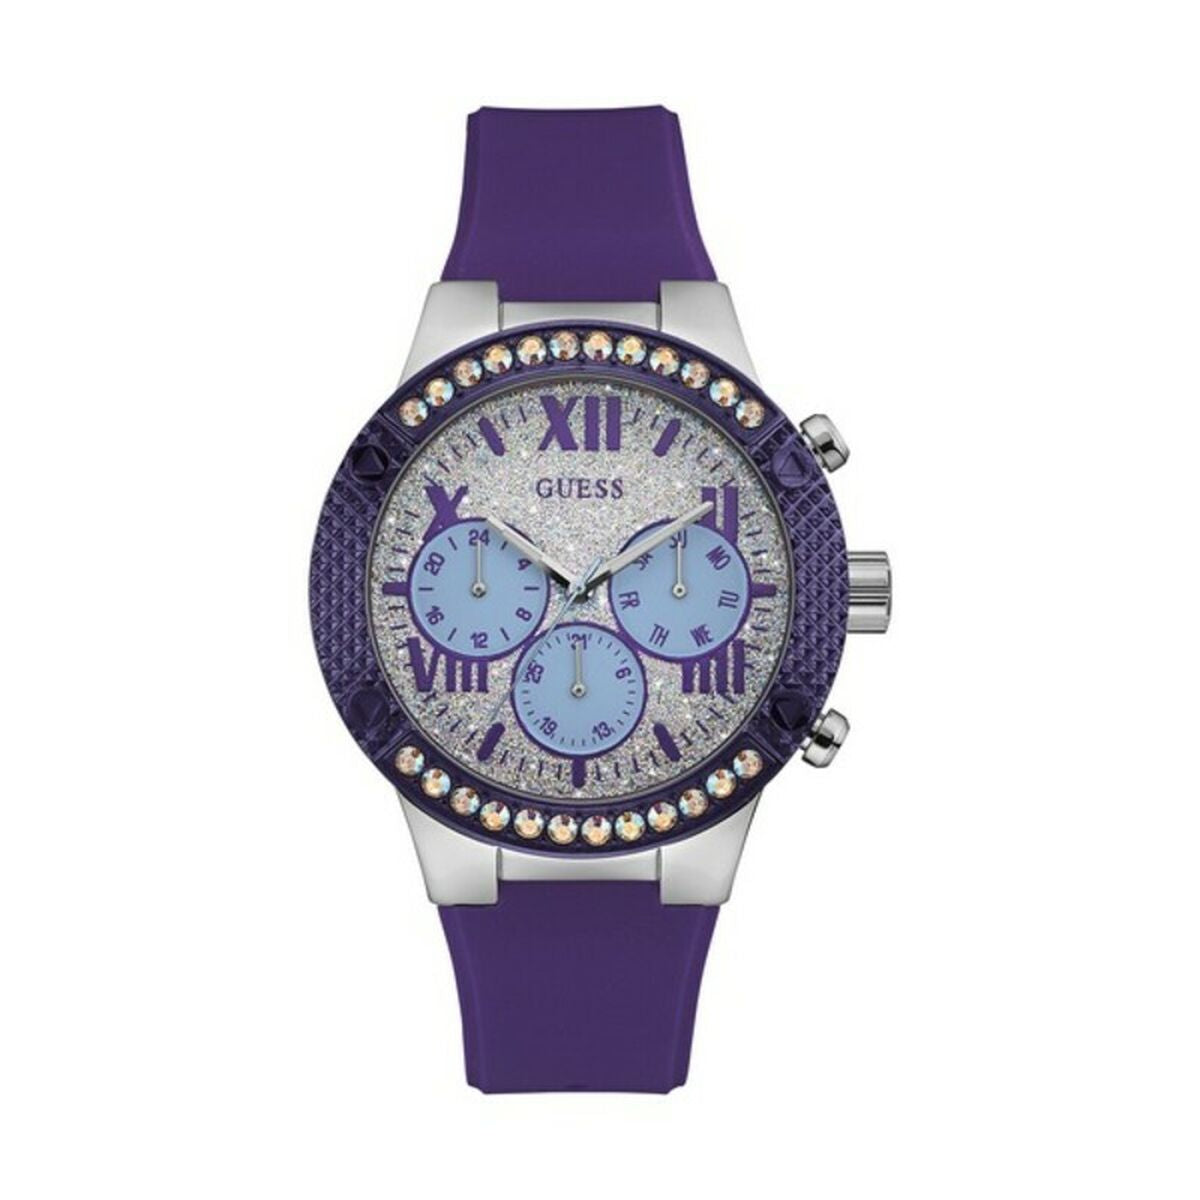 Ladies' Watch Guess W0772L5 (Ø 39 mm), Guess, Watches, Women, ladies-watch-guess-w0772l5-o-39-mm, : Quartz Movement, :Purple, :Silver, Brand_Guess, category-reference-2570, category-reference-2635, category-reference-2995, category-reference-t-19667, category-reference-t-19725, Condition_NEW, fashion, gifts for women, original gifts, Price_50 - 100, RiotNook